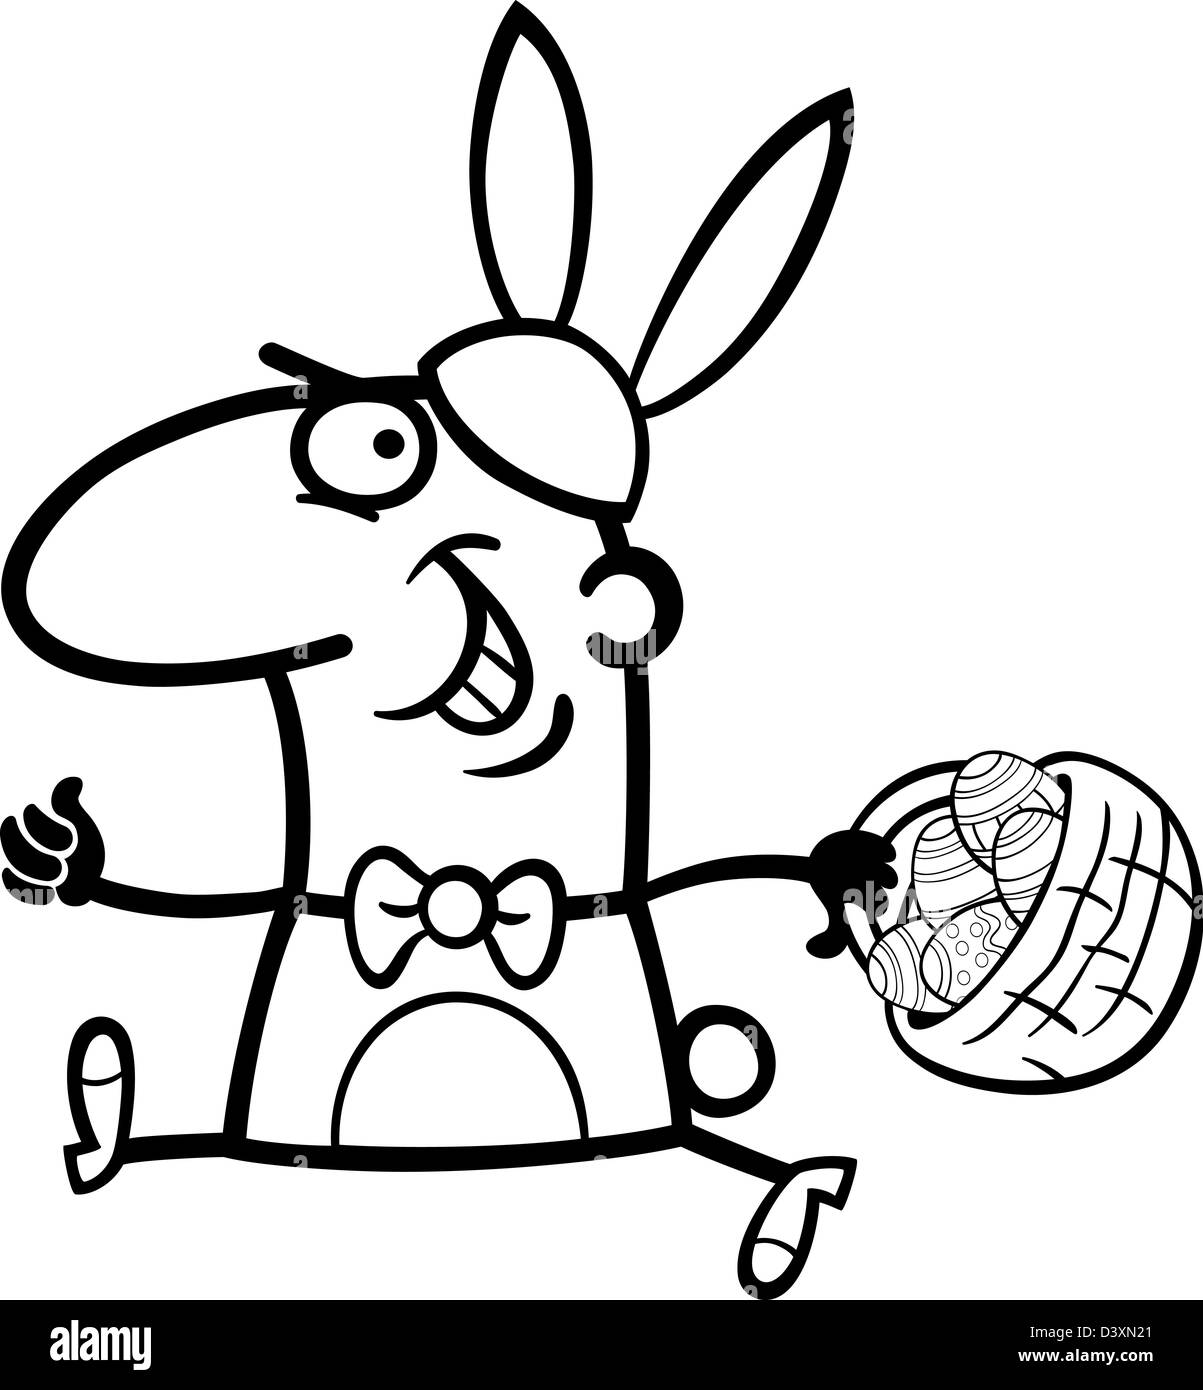 Black and White Cartoon Illustration of Funny Man in Easter Bunny Costume running with Easter Eggs in a Basket for Coloring Book Stock Photo